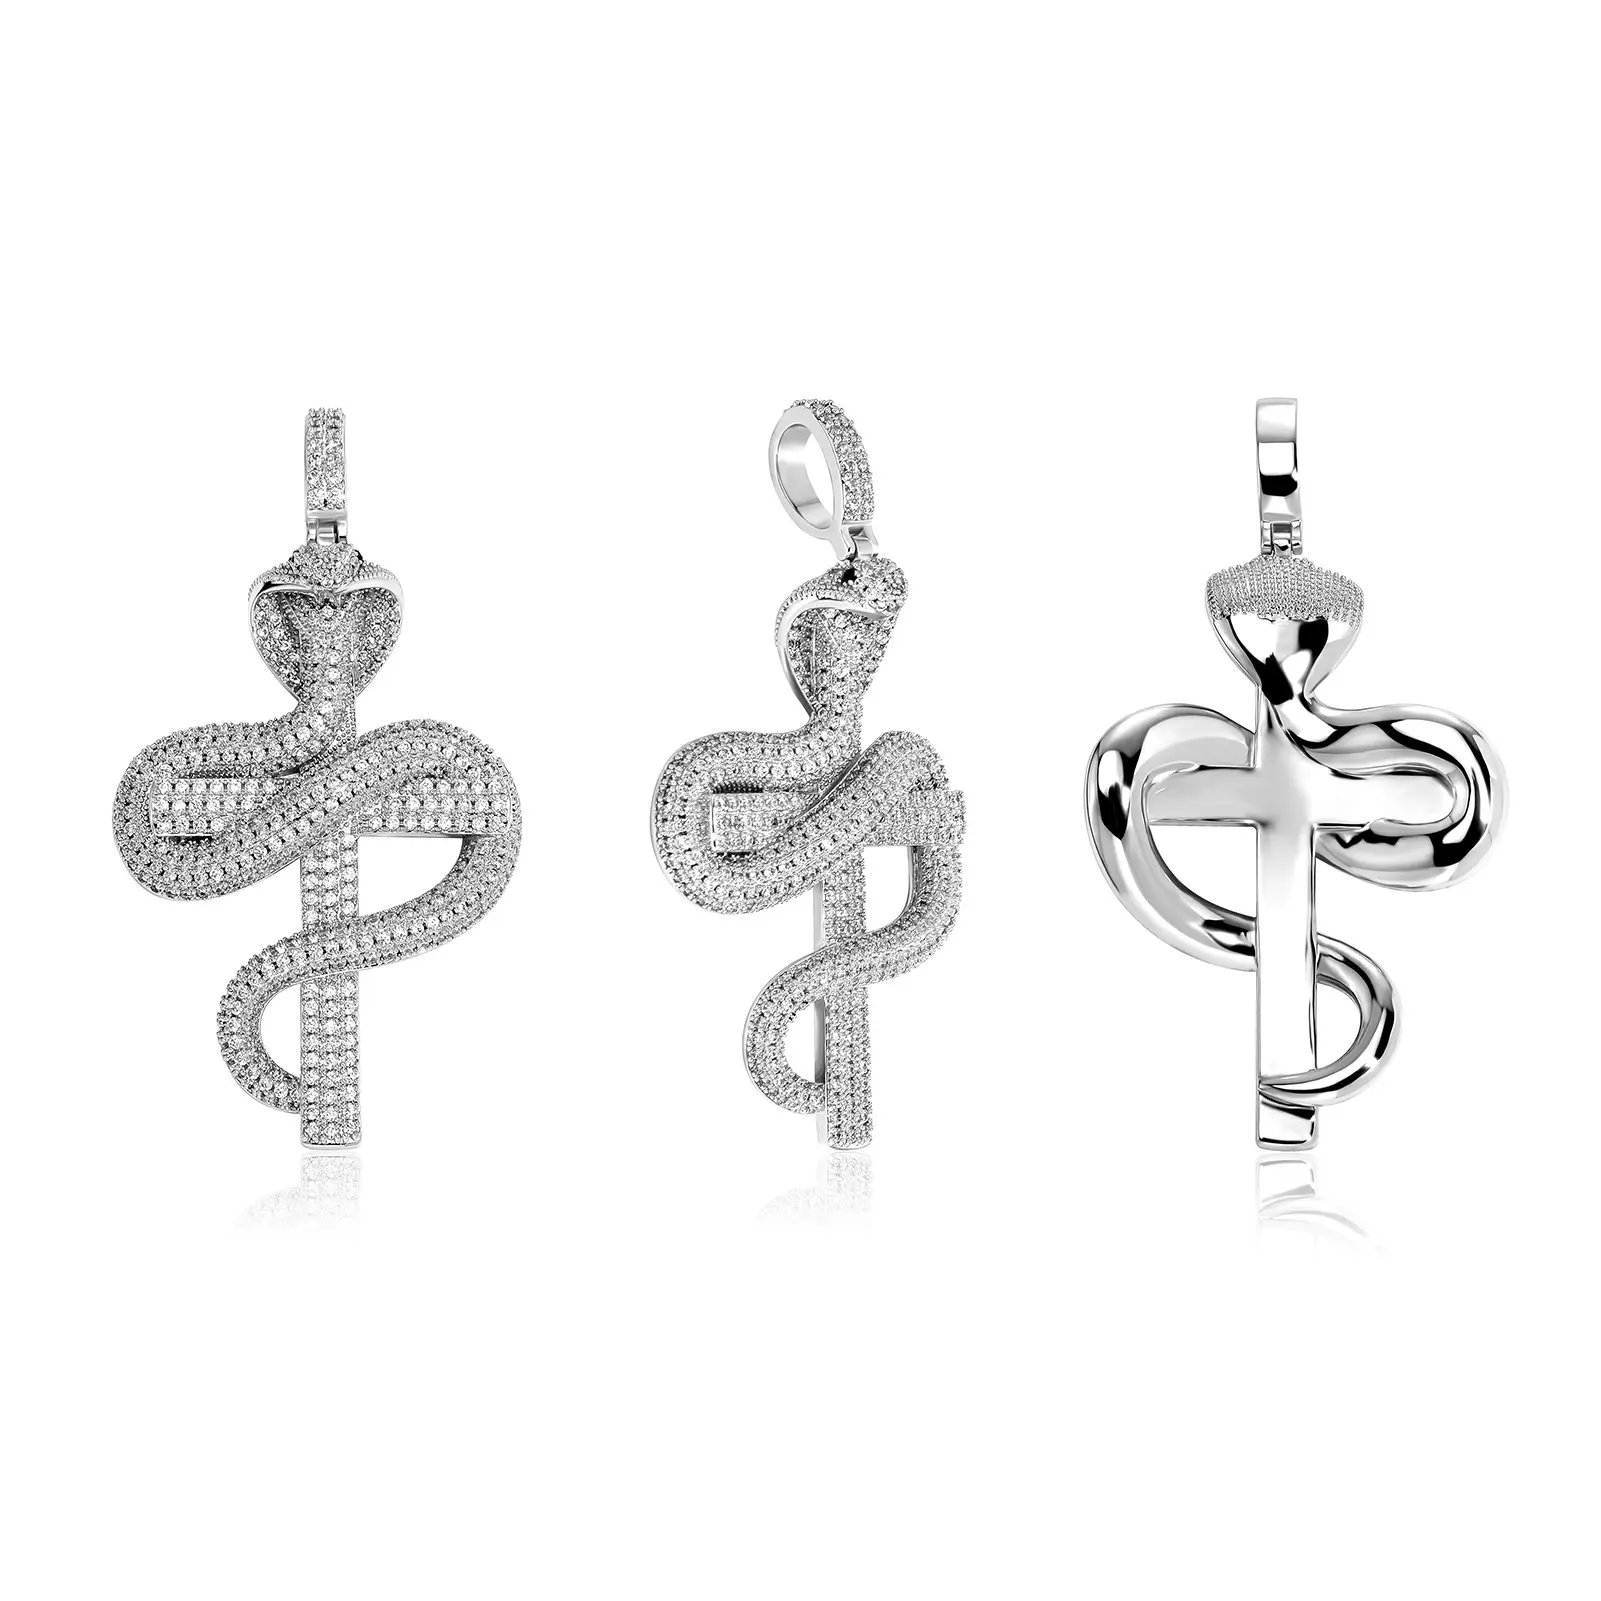 Wholesale Fashion Jewelry Pendants Charms Gold plated Iced Out Cz Diamond Cobra Snake Cross Pendant for Necklace